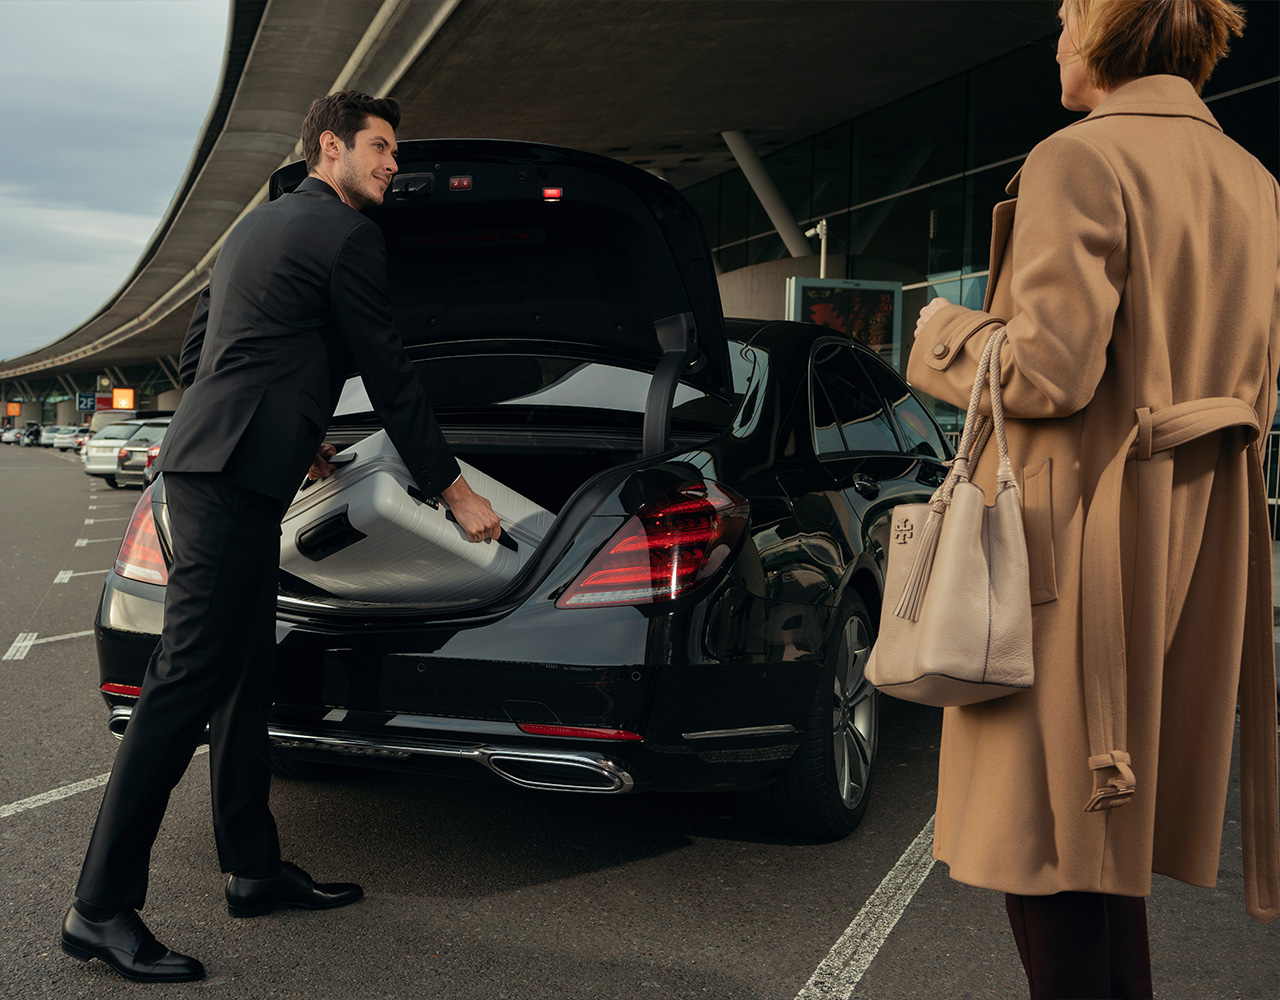 A chauffeur packs a woman's bags into the back of the vehicle as she waits nearby.